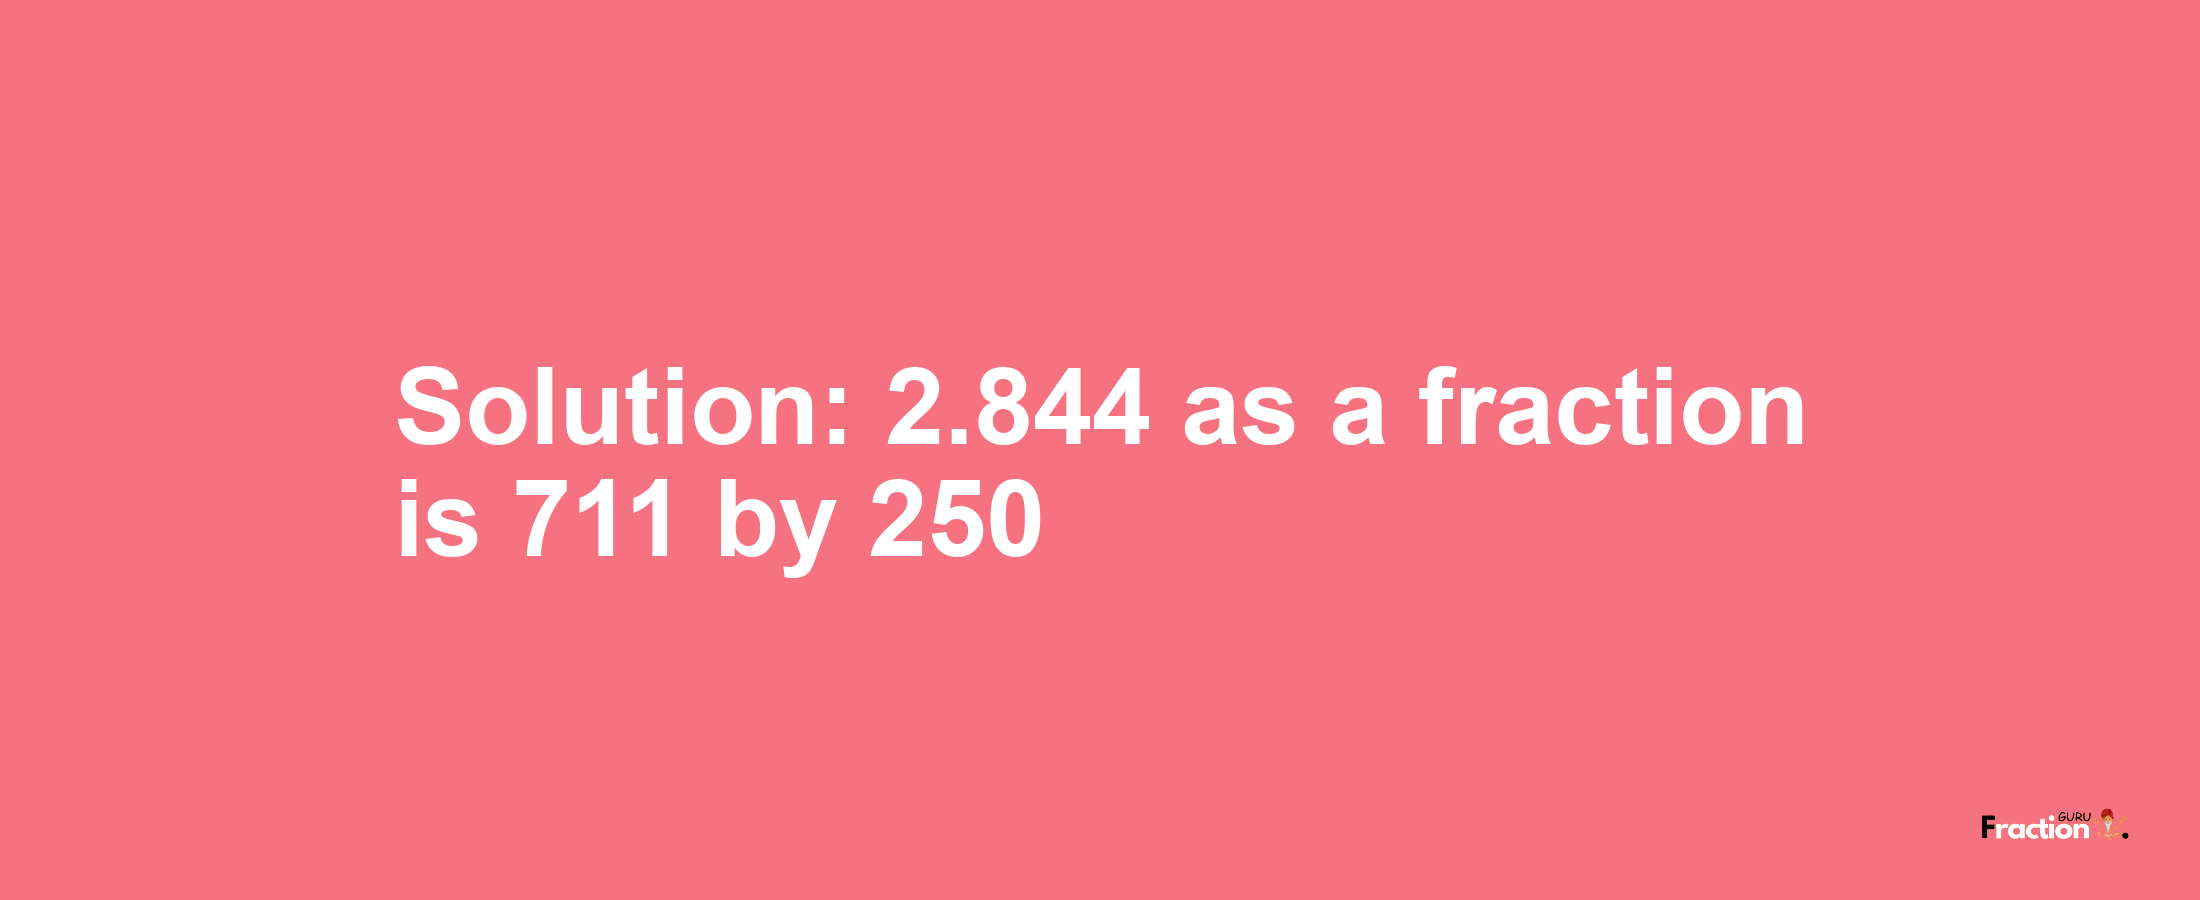 Solution:2.844 as a fraction is 711/250